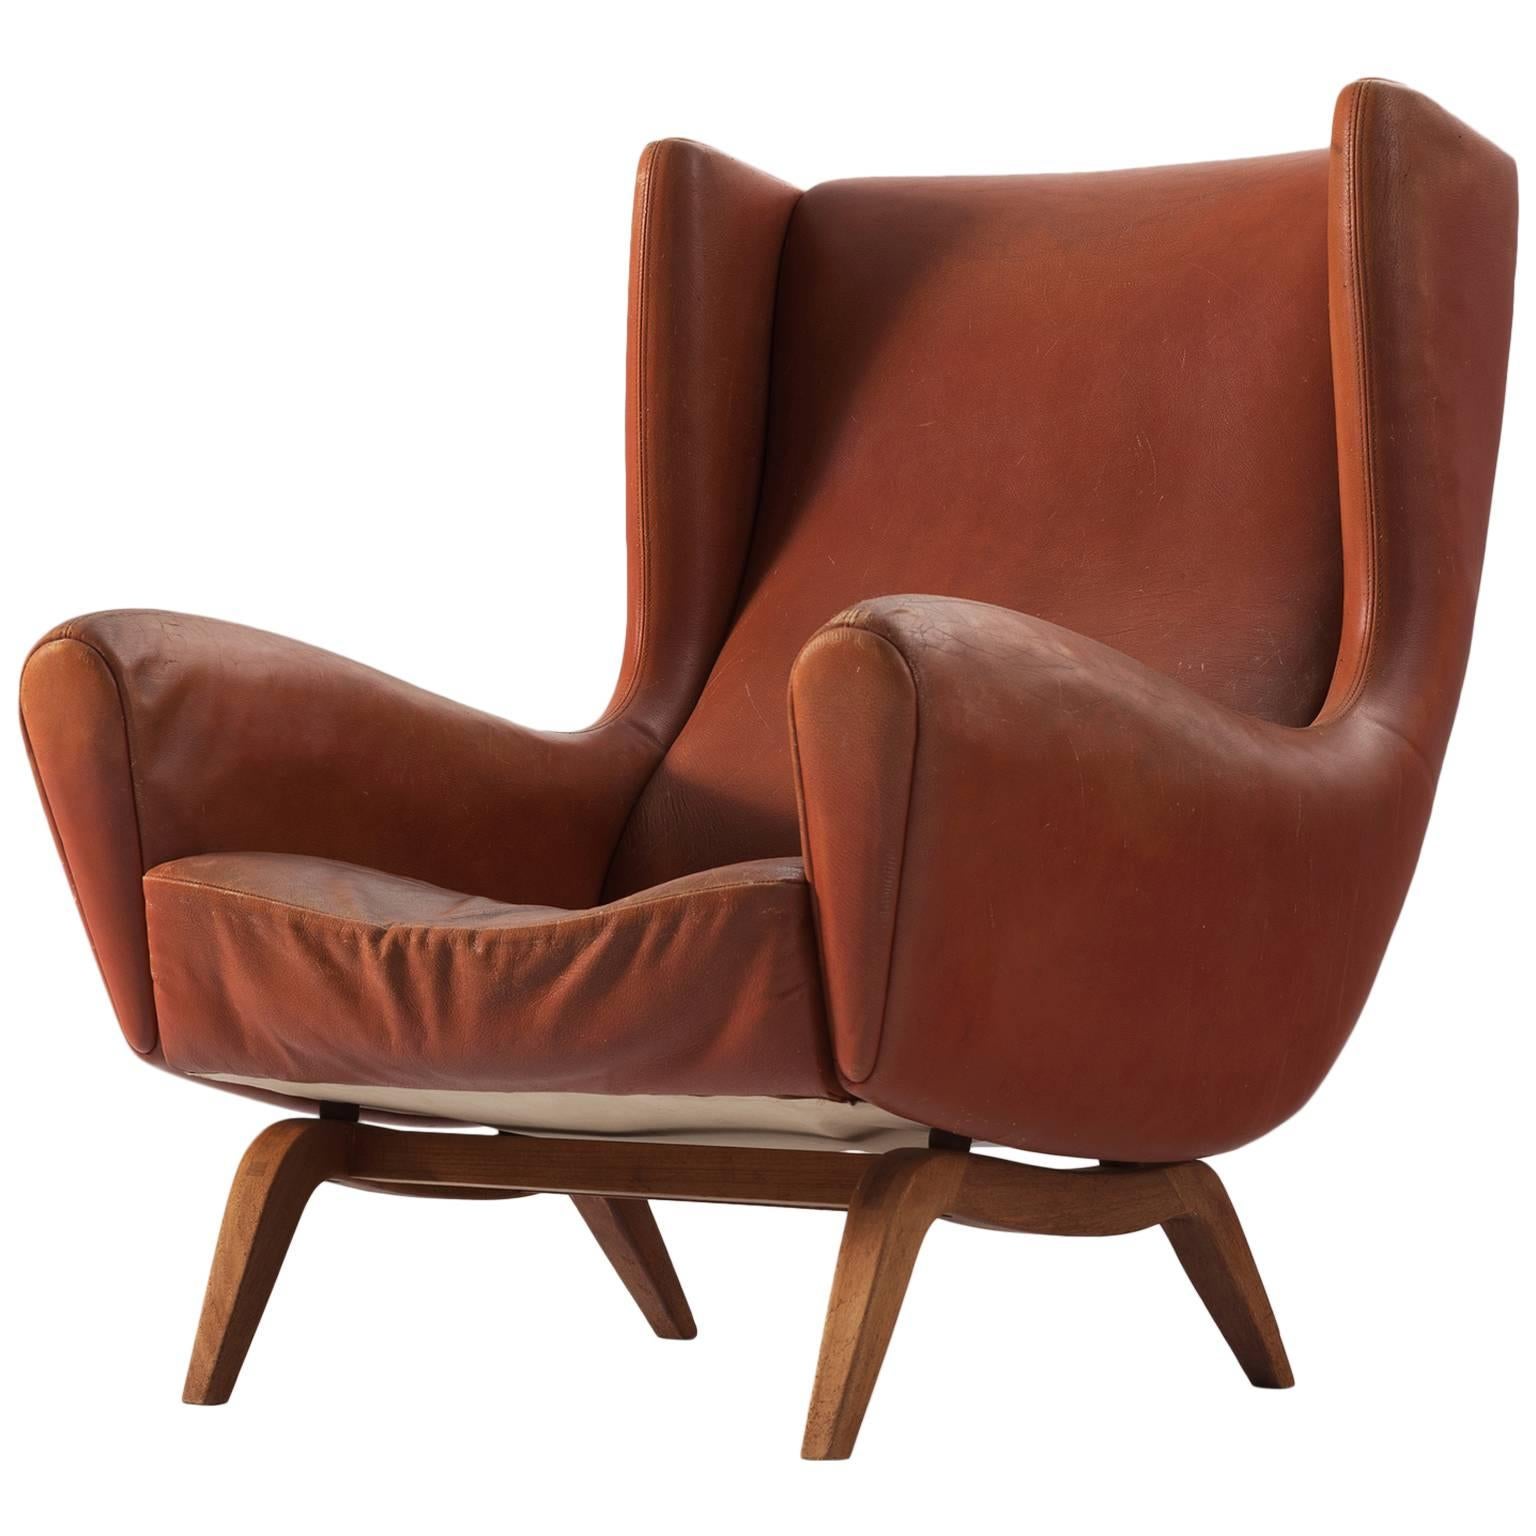 Illum Wikkelso Lounge Chair in Cognac Leather